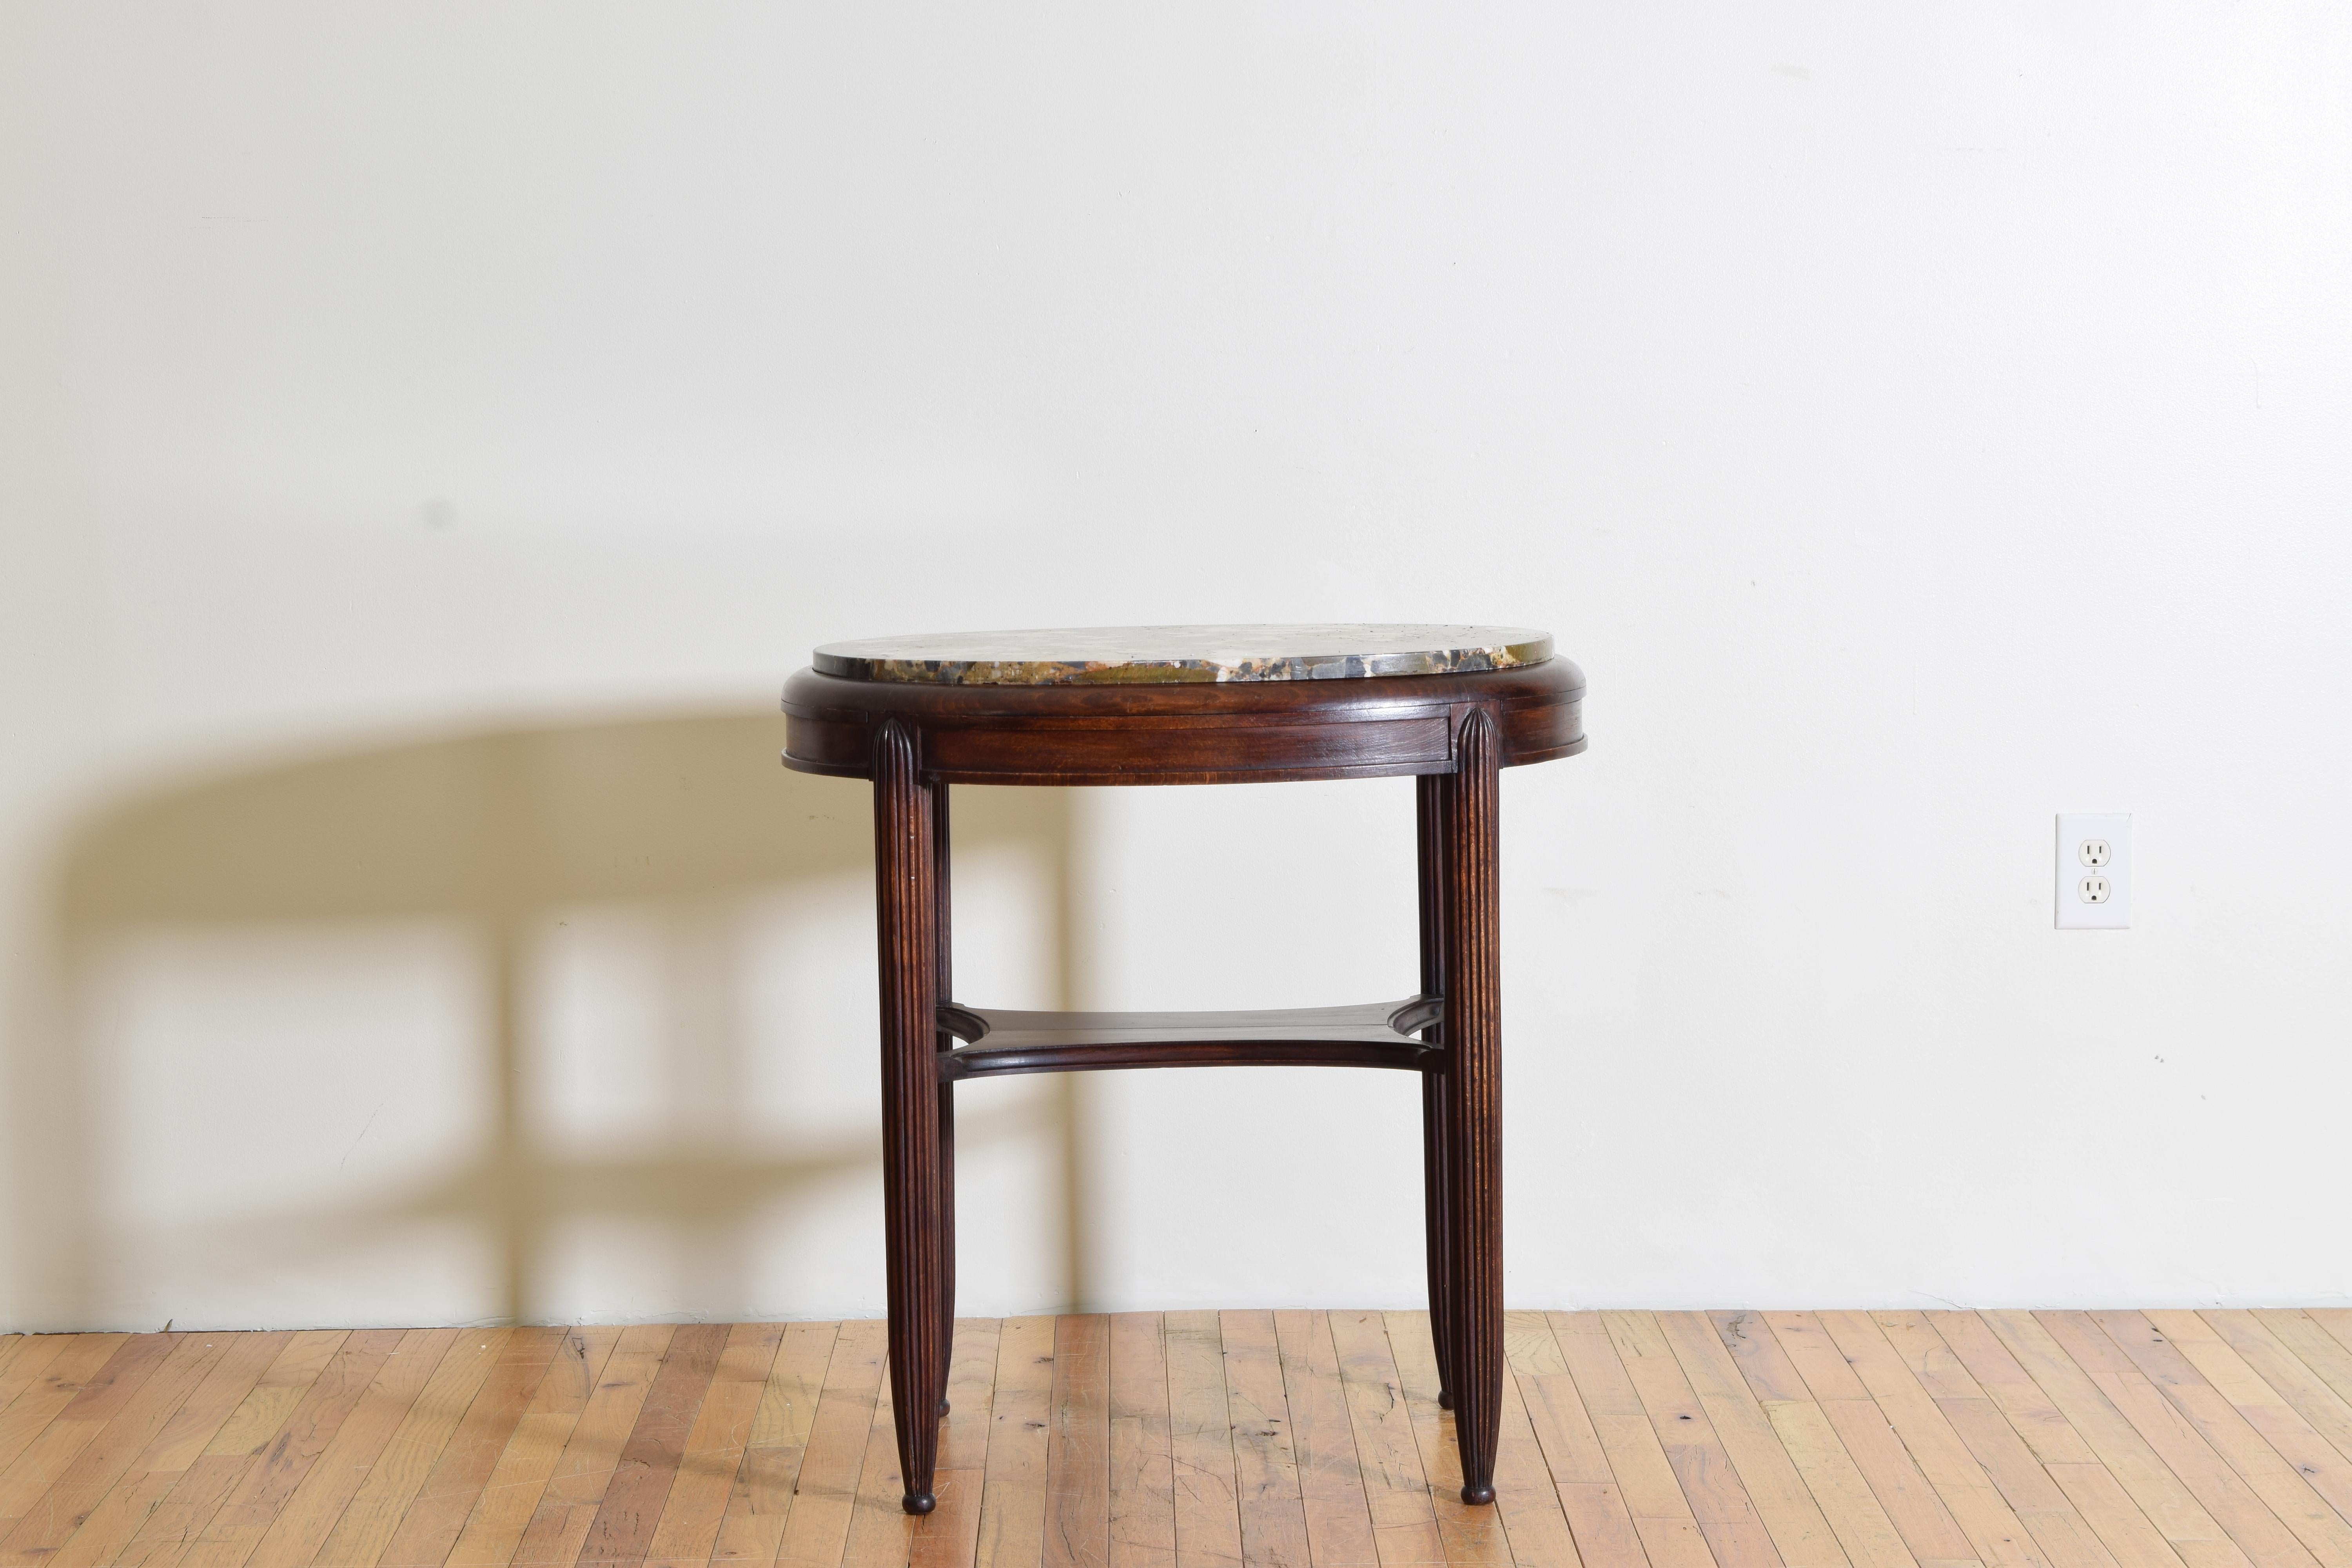 French Art Deco Period Mahogany and Marble-Top Table, circa 1920-1930 In Good Condition For Sale In Atlanta, GA